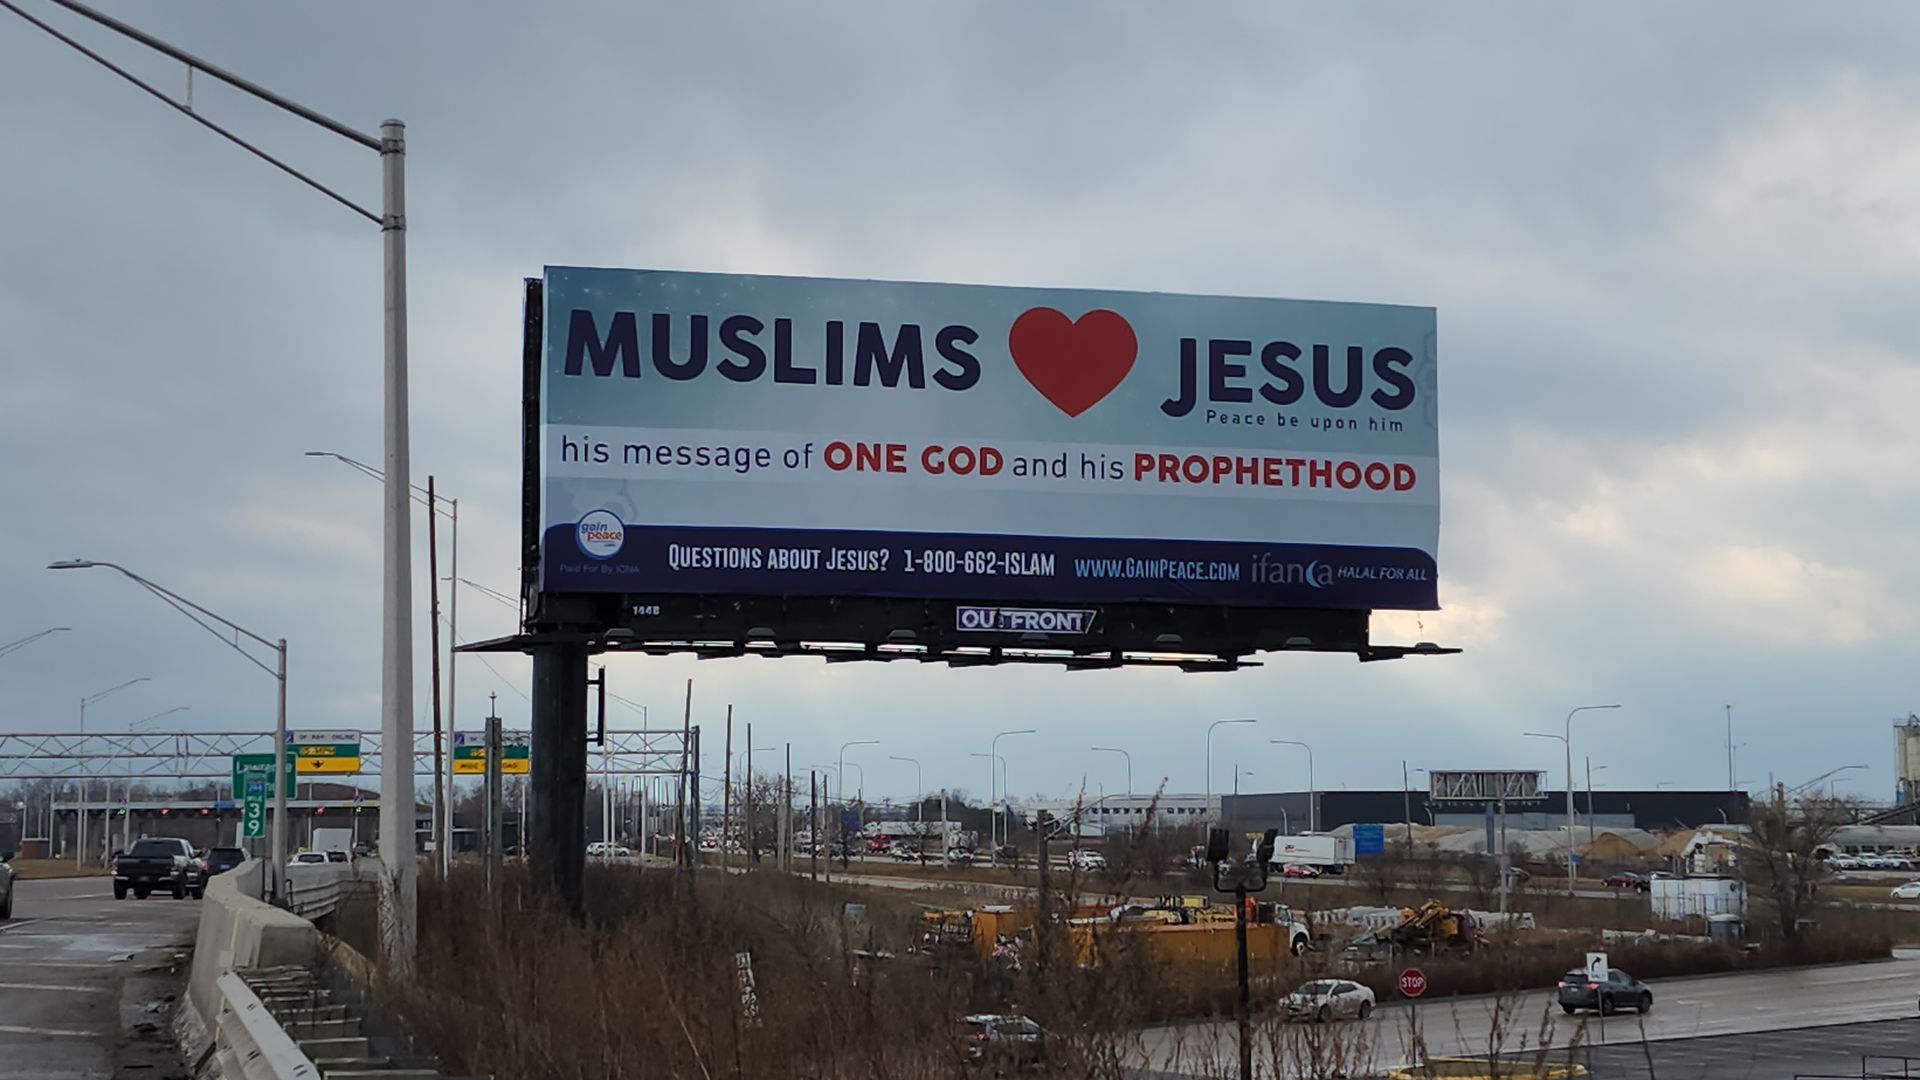 Photo of a billboard that says "Muslims loves Jesus"